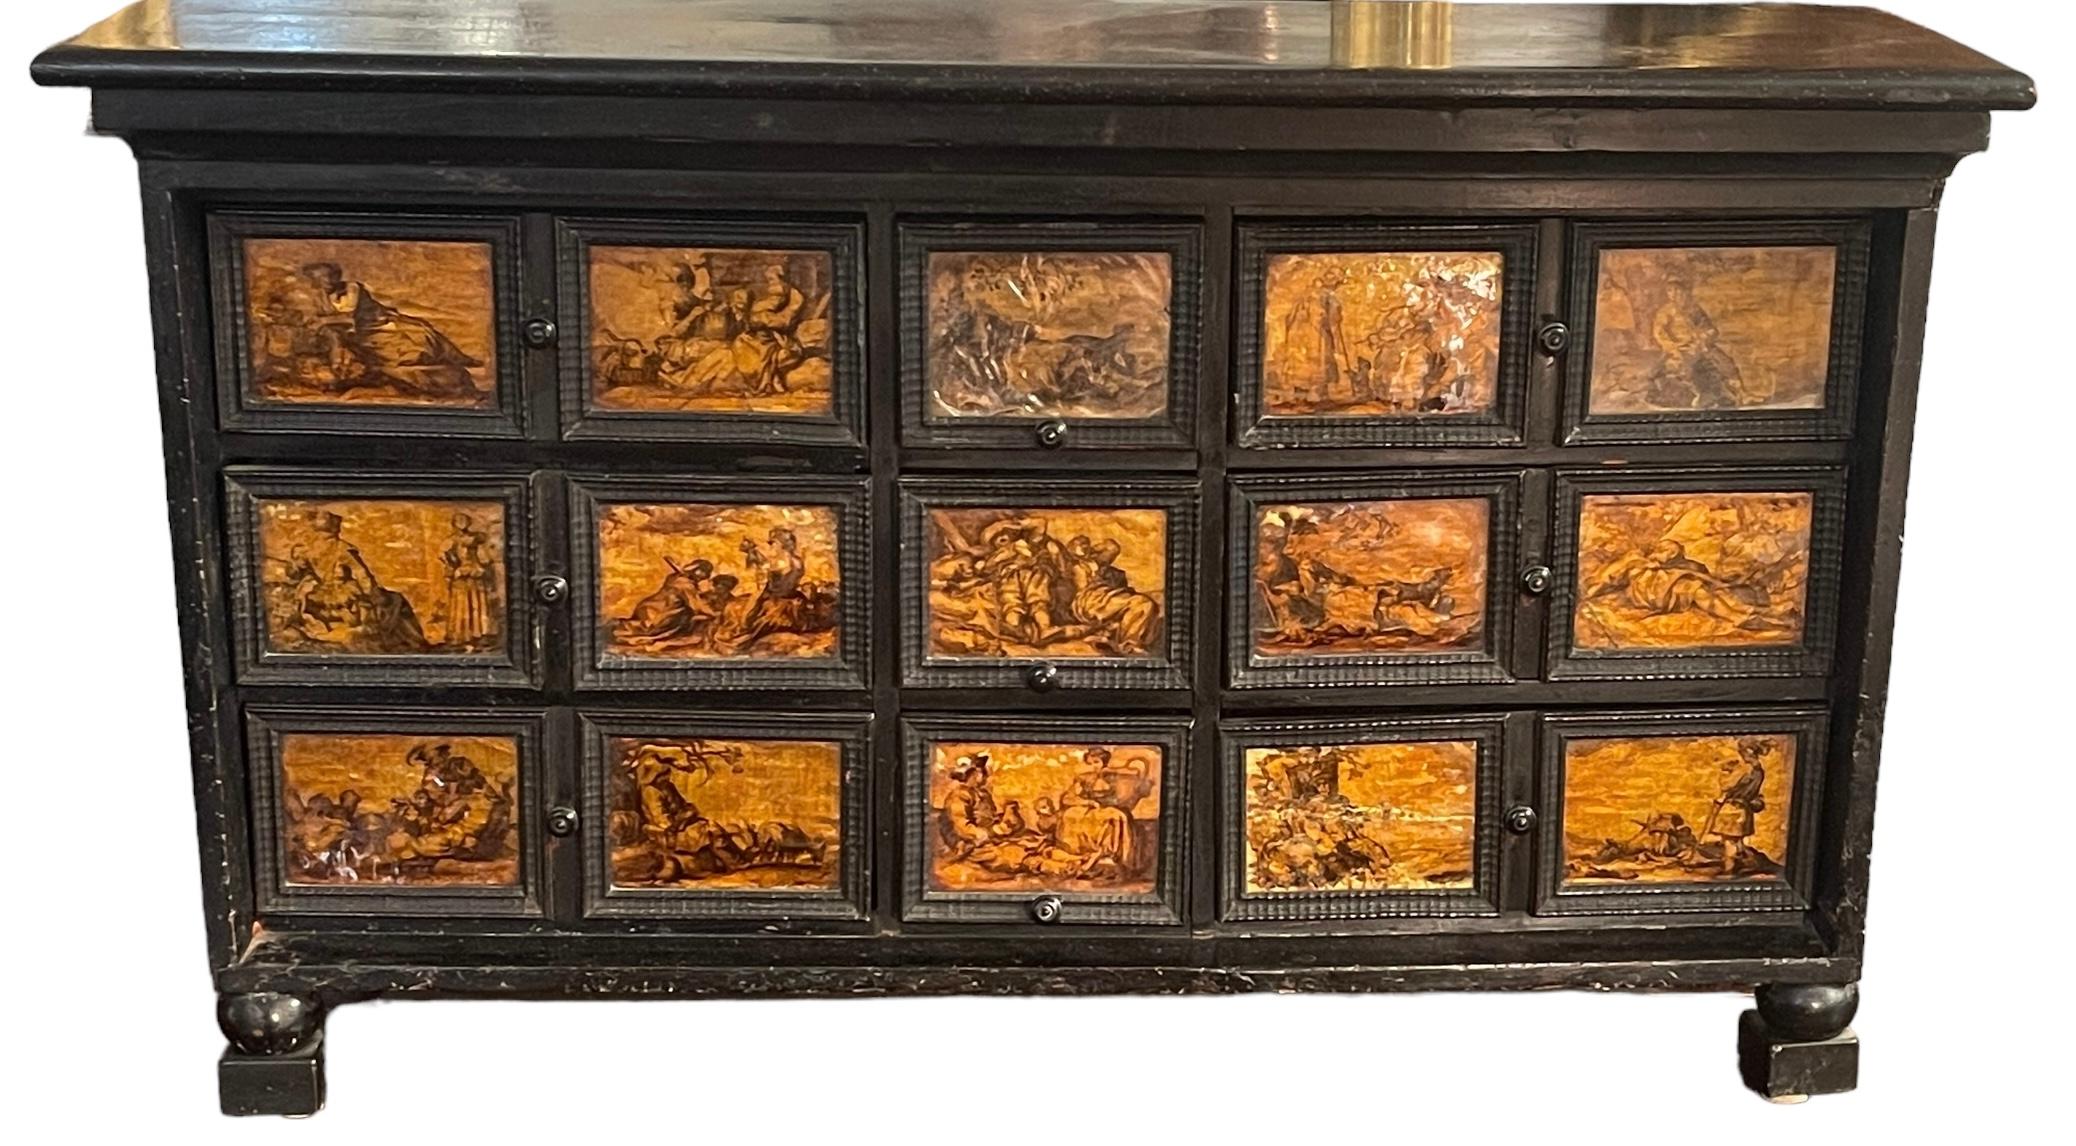 Ancient coin cabinet (cabinet), 1600s, Neapolitan.

Valuable and rare piece of furniture, made with an ebony structure, 9 drawers and 15 tiles on a silver plate, a layer of shellac and ink drawings depicting scenes of country life. Each frame has a